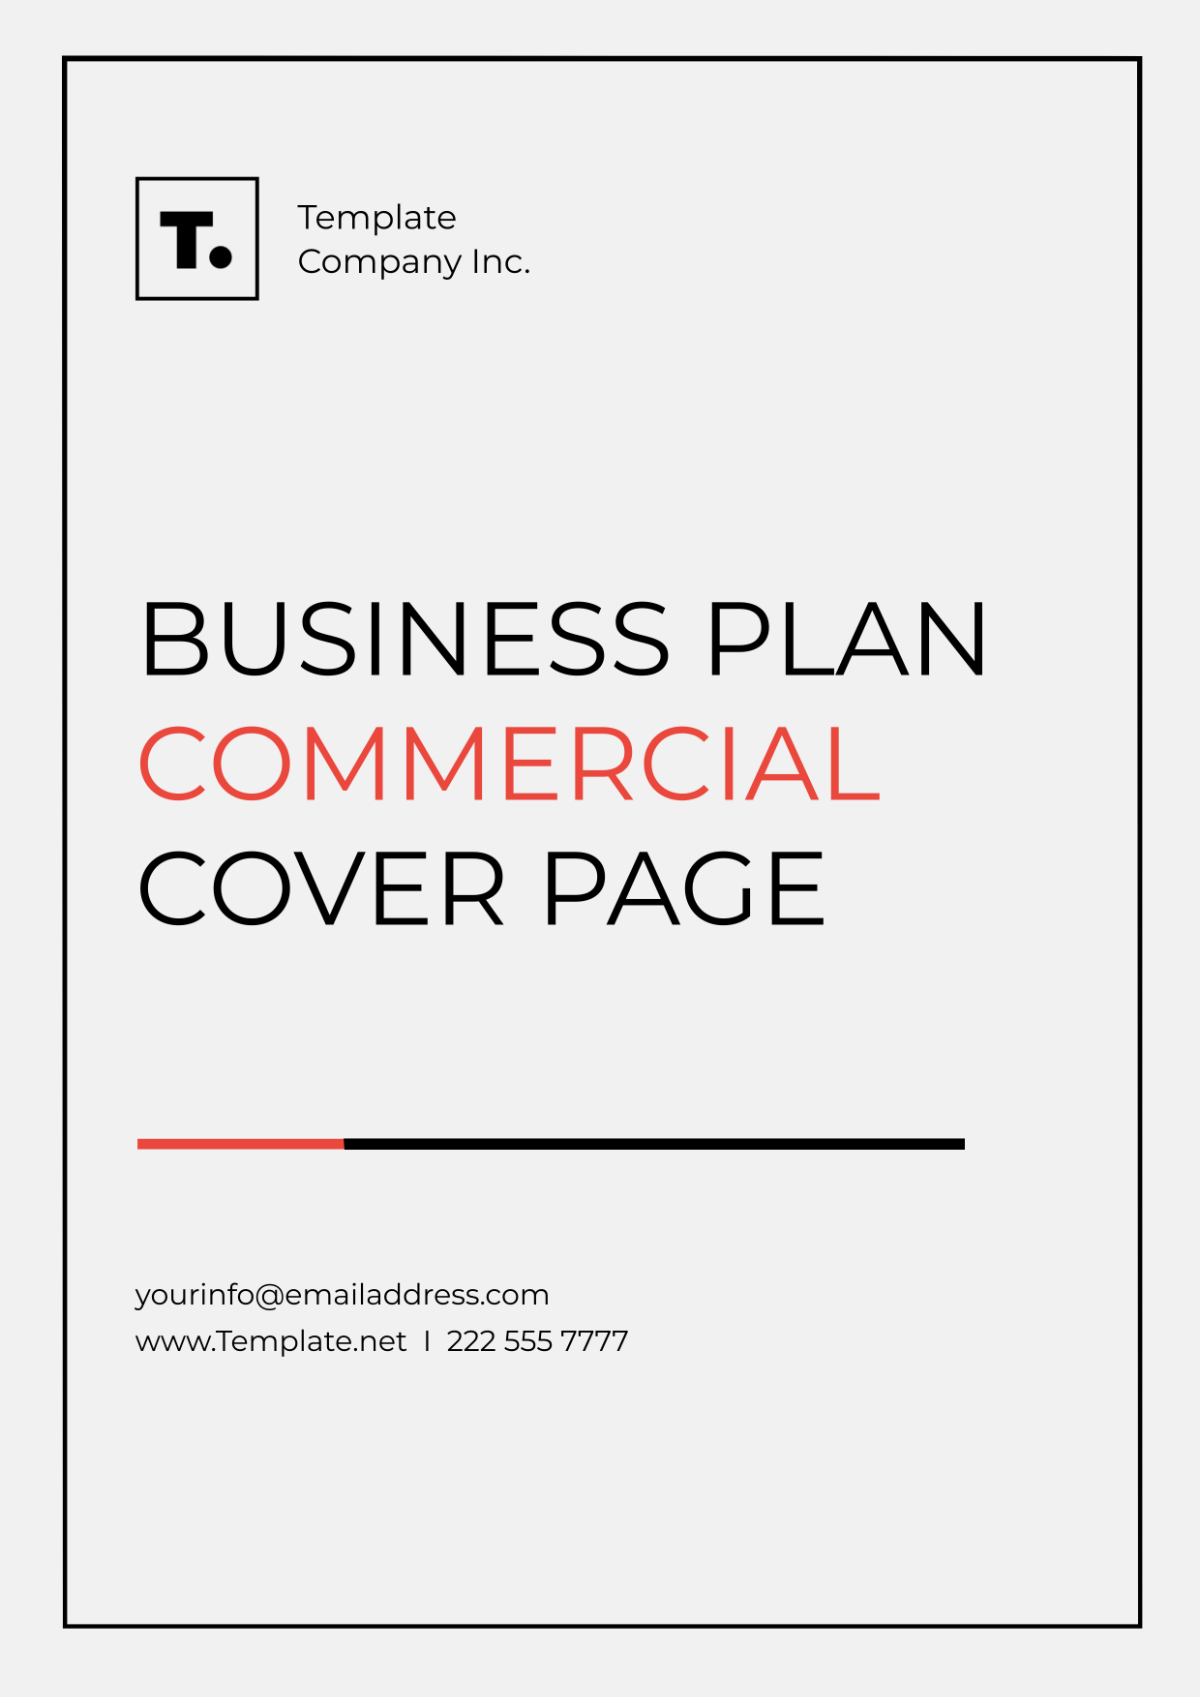 Business Plan Commercial Cover Page Template